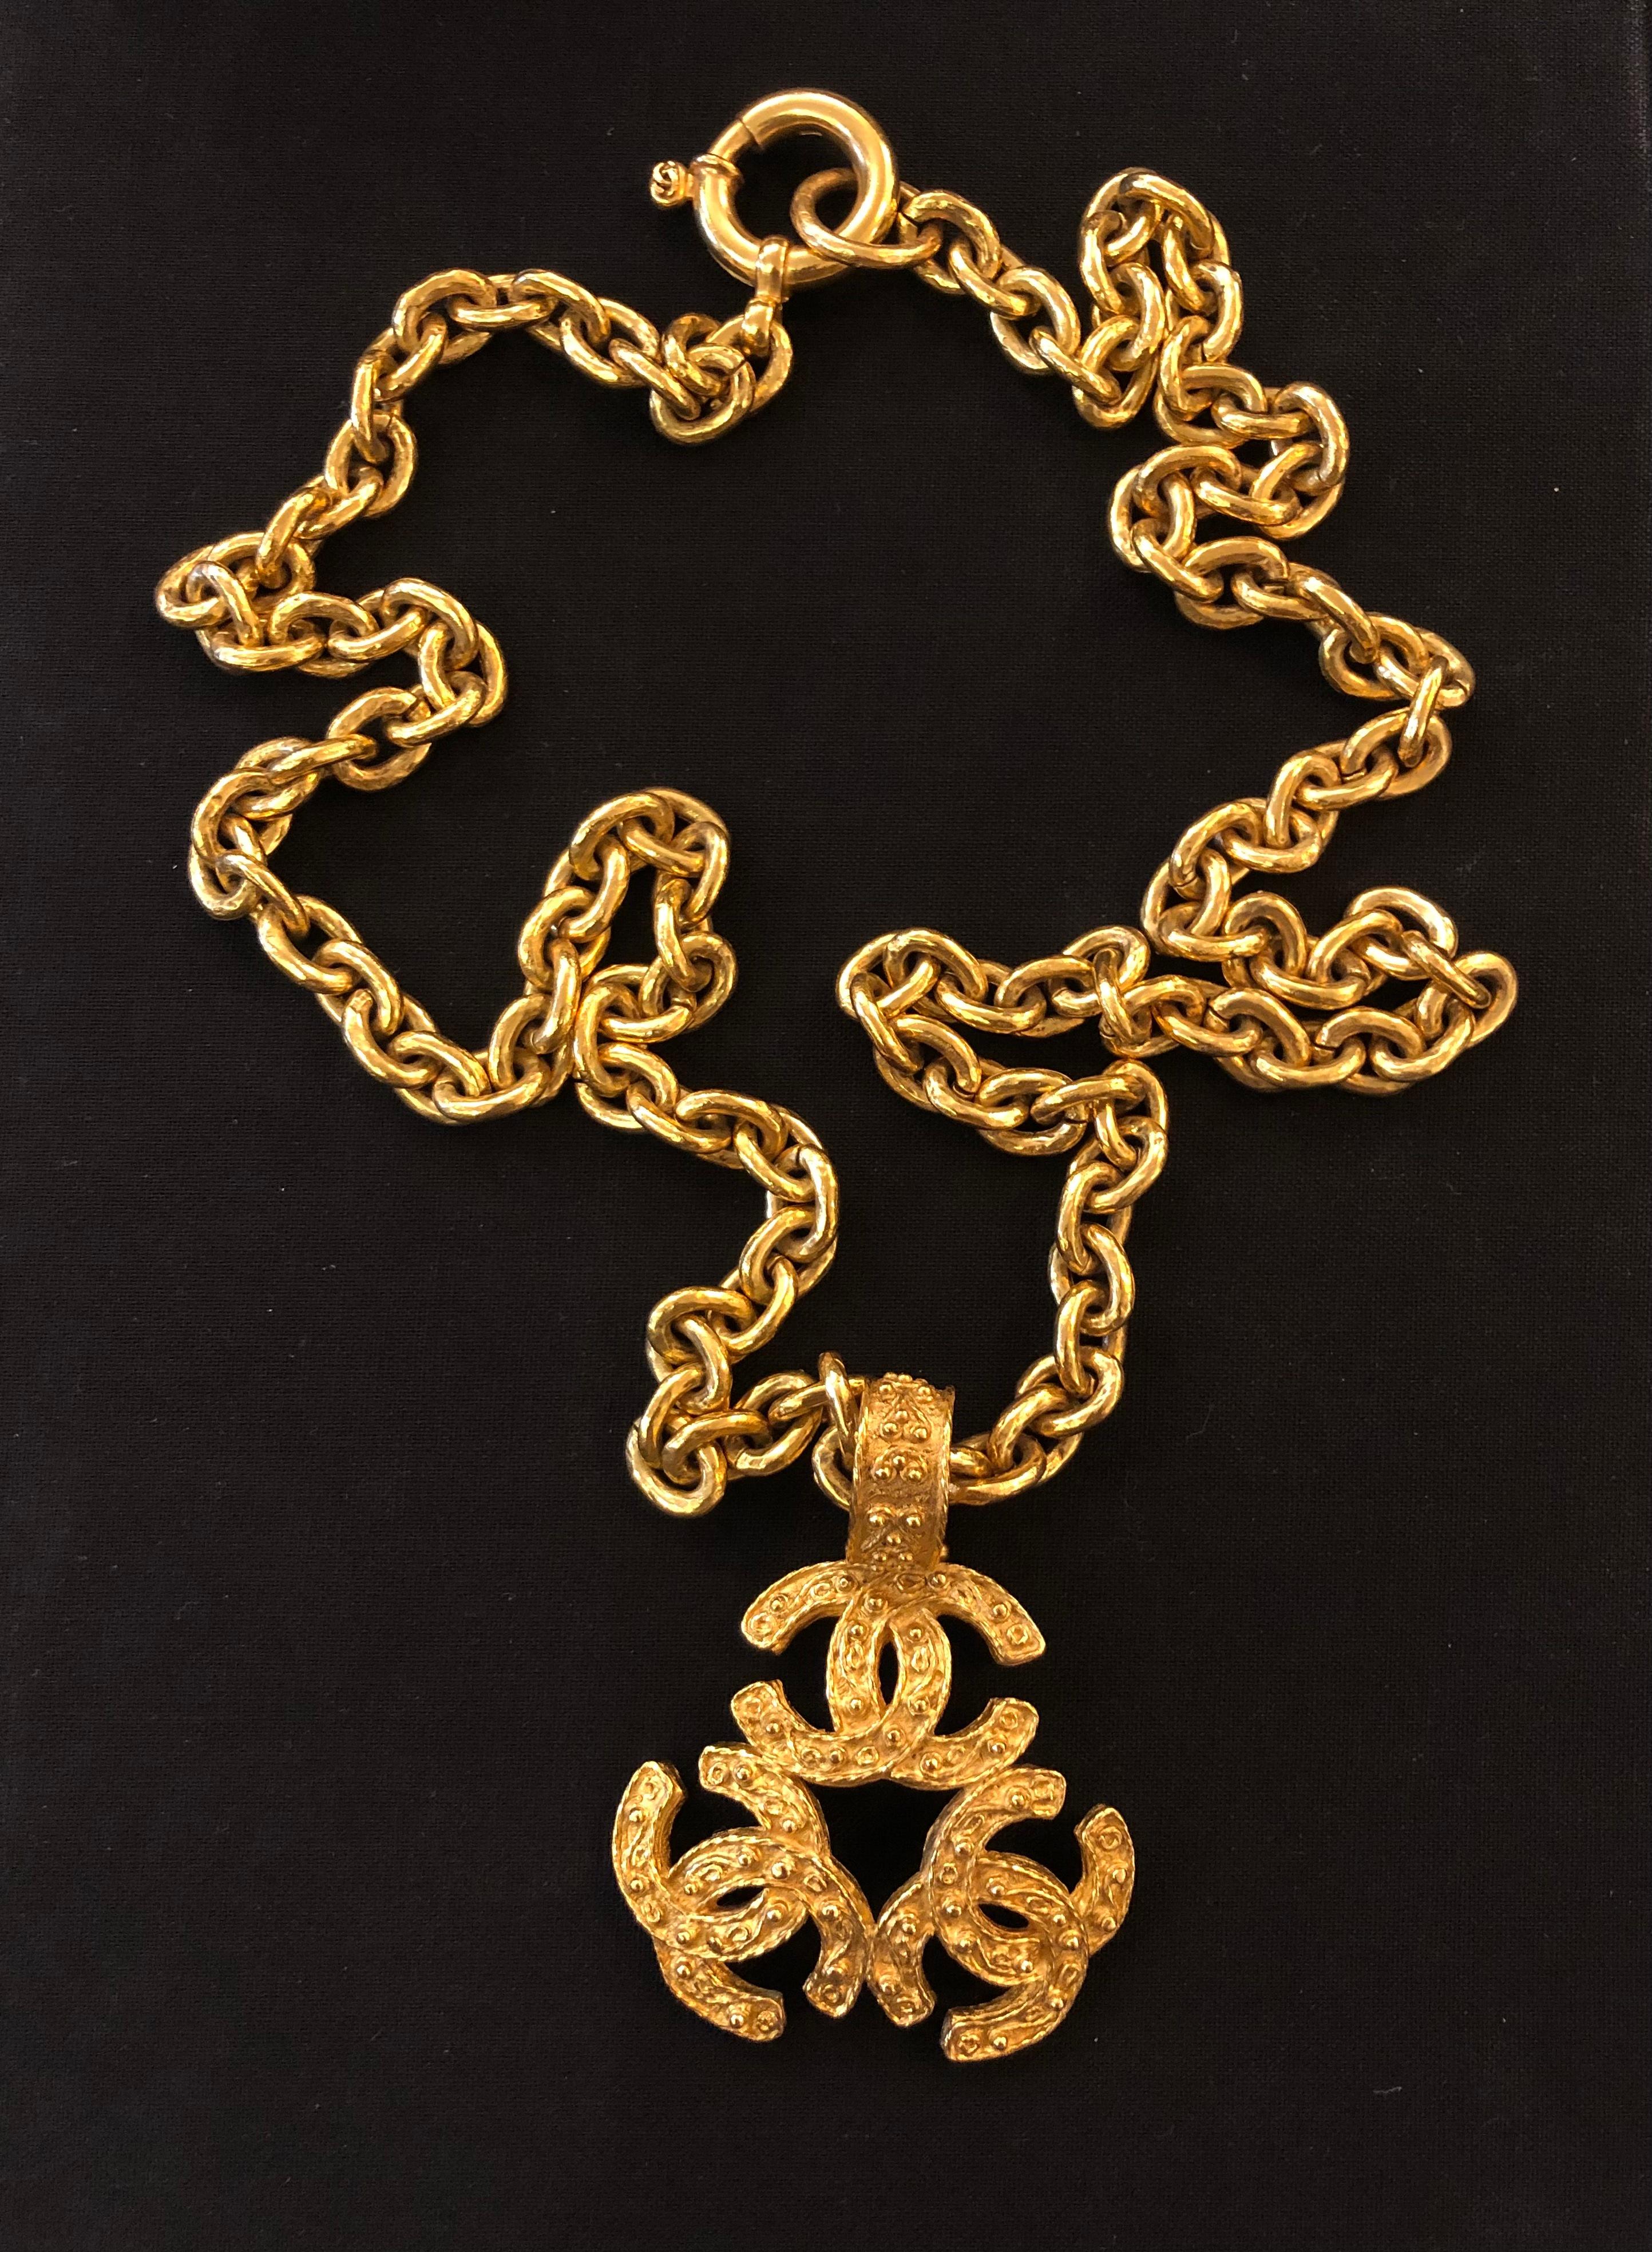 1994 Chanel gold toned chain long necklace featuring a sturdy gold toned chain and a triple textured CC charm. Stamp CHANEL 94A made in France. Measures 88 cm (34.5 inches) Charm 6.7 x 5.0 cm. Spring ring fastening. Comes with box.

Condition: Minor